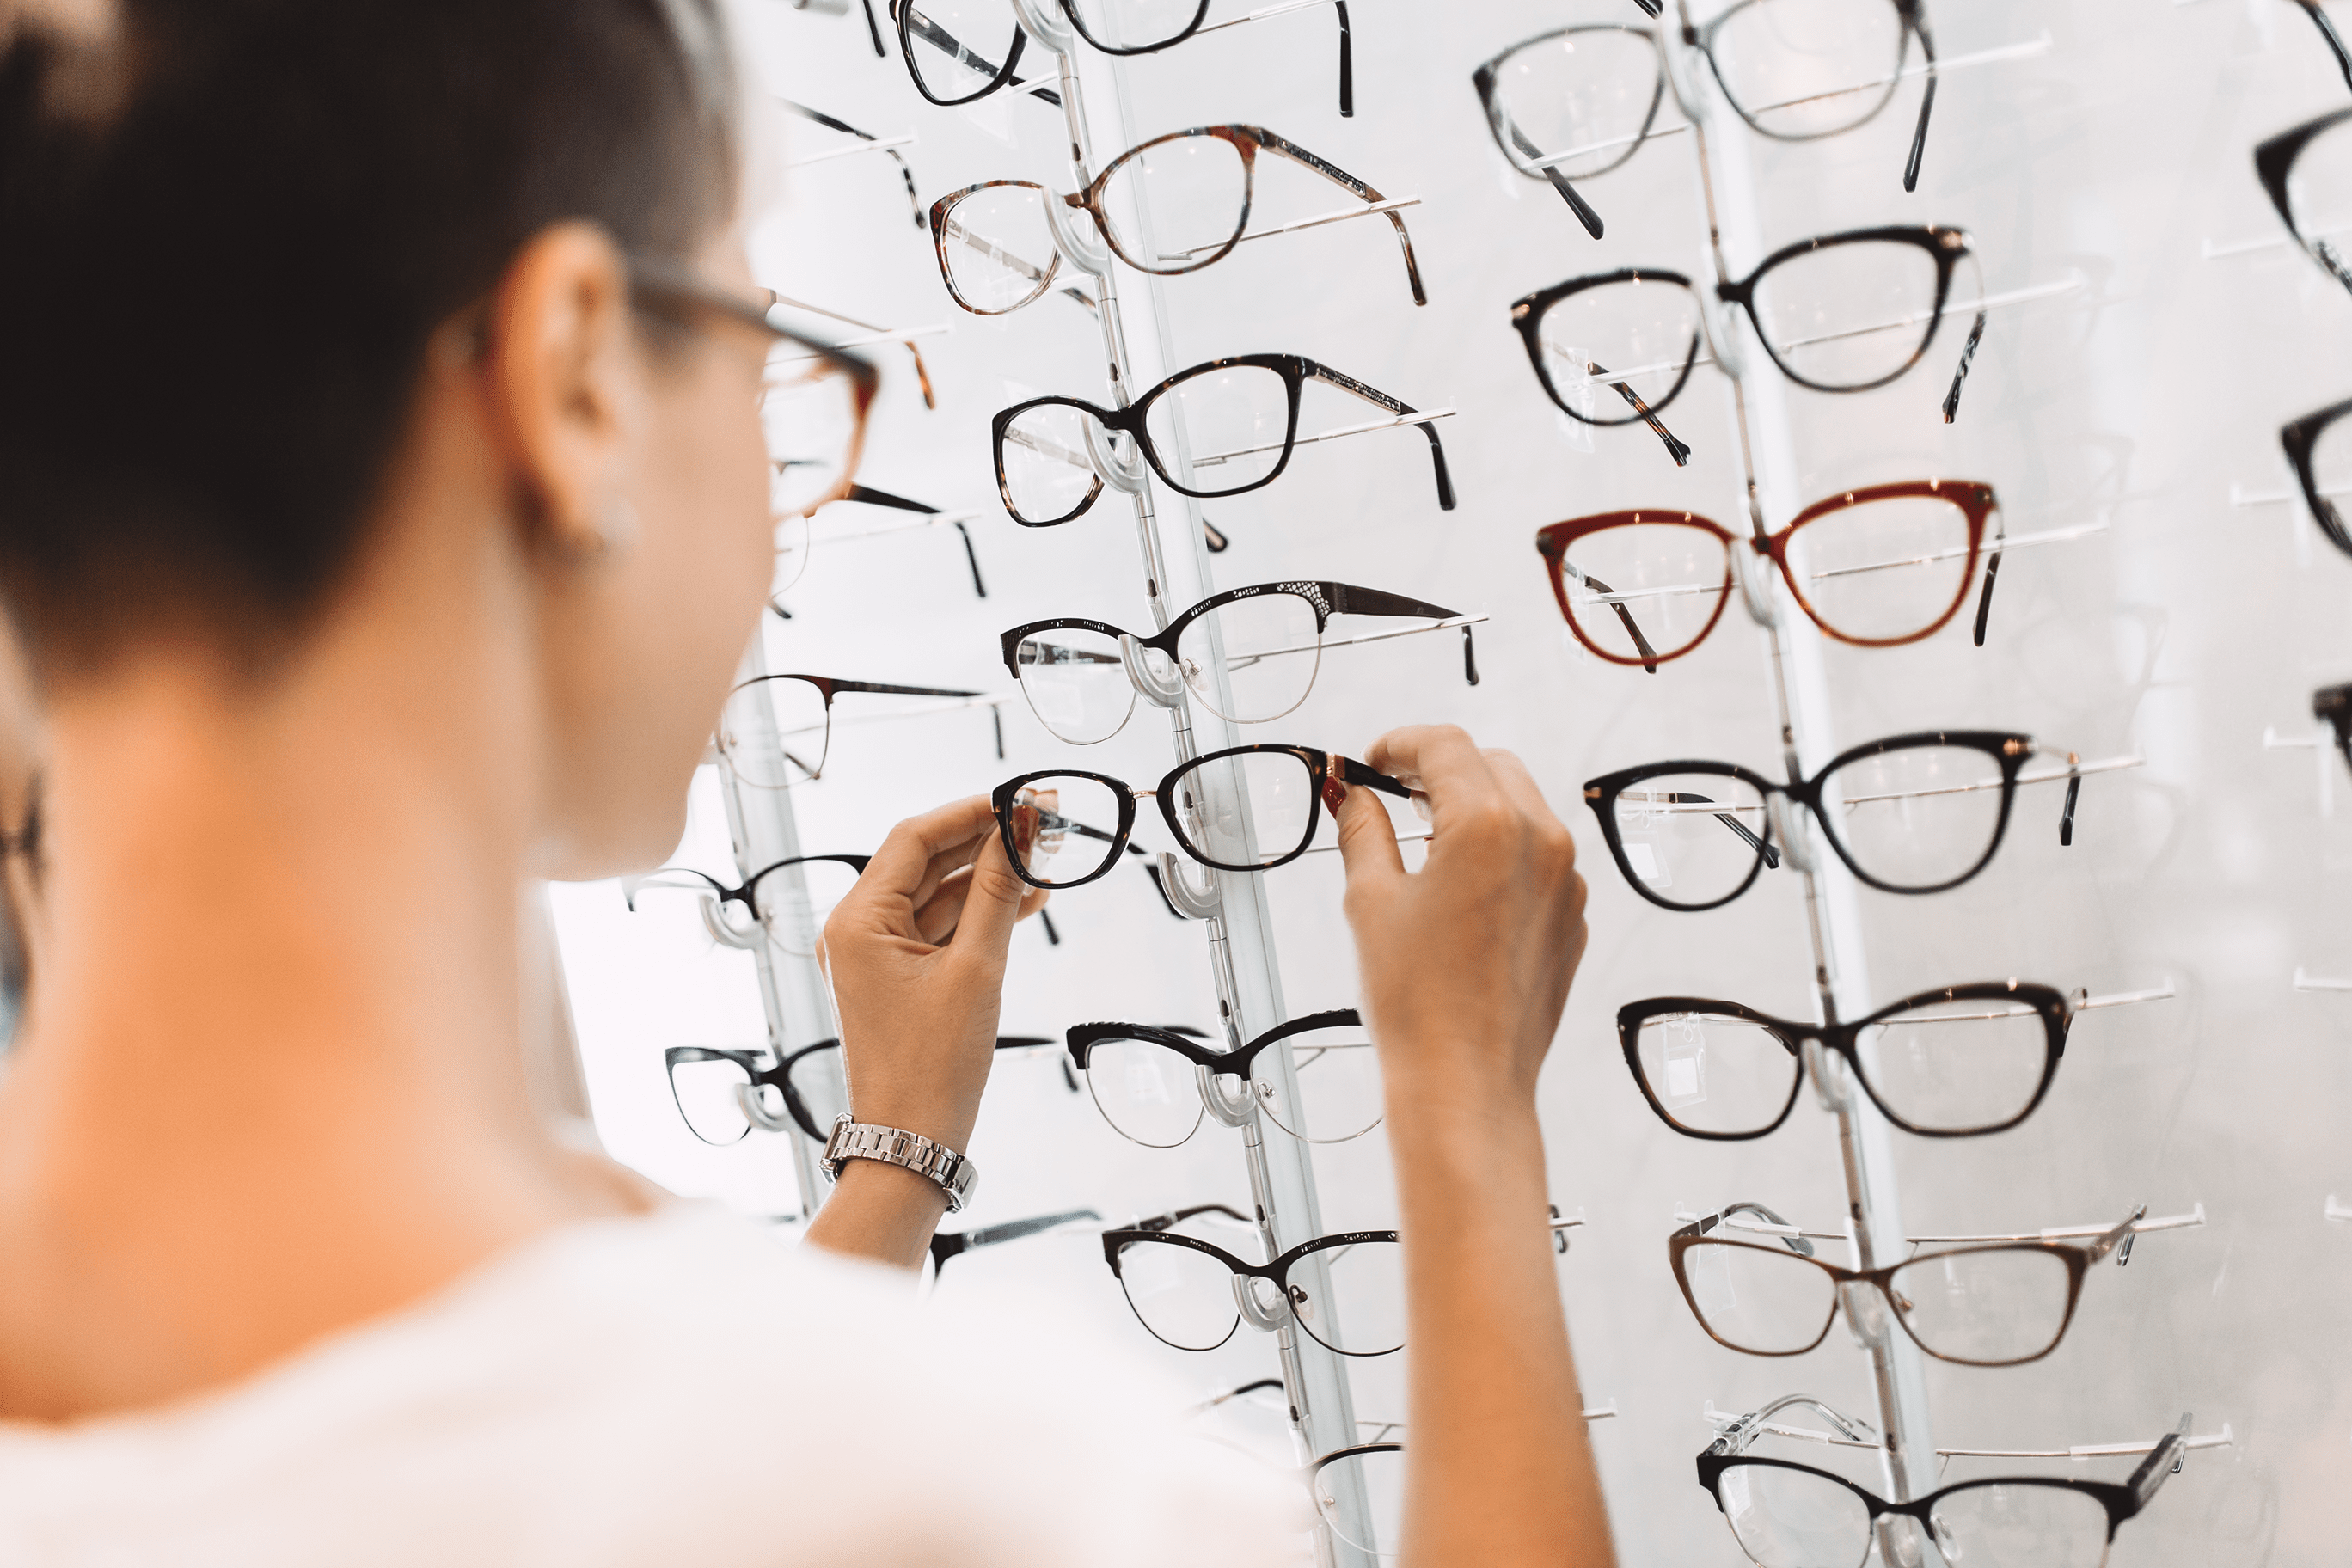 A woman holds up a pair of glasses in a shop in front of a mirror